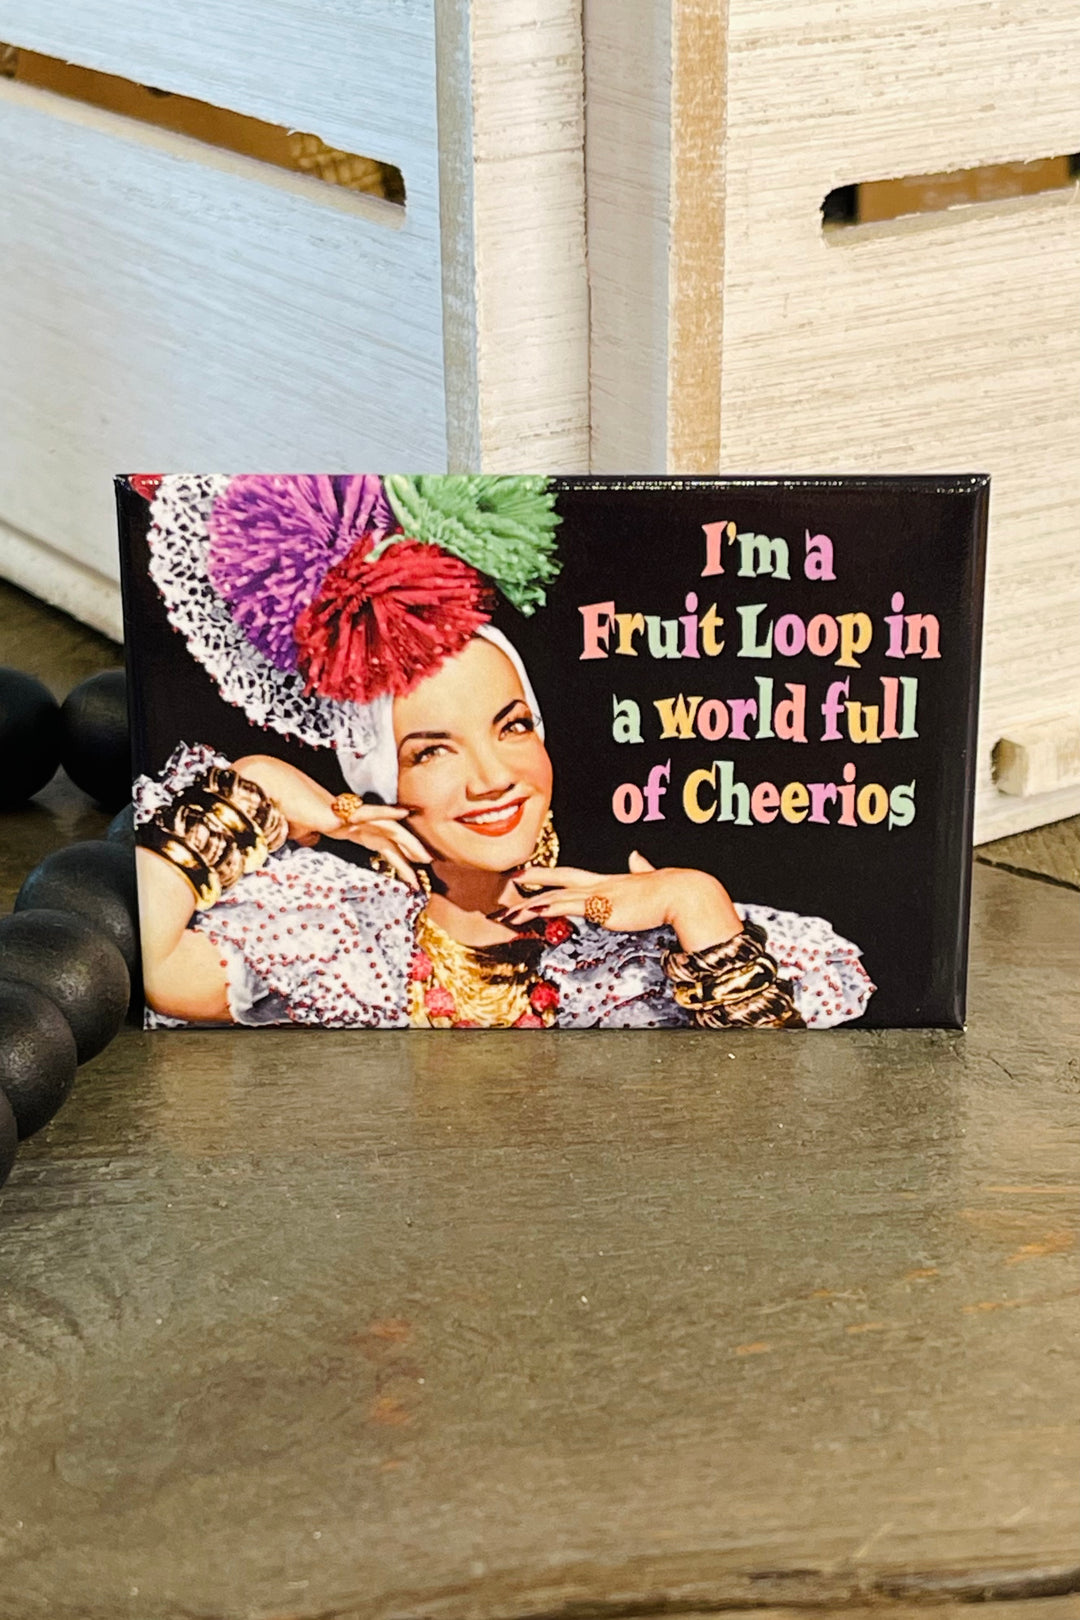 MAGNET: I'm a Fruit Loop in a world full of Cheerios